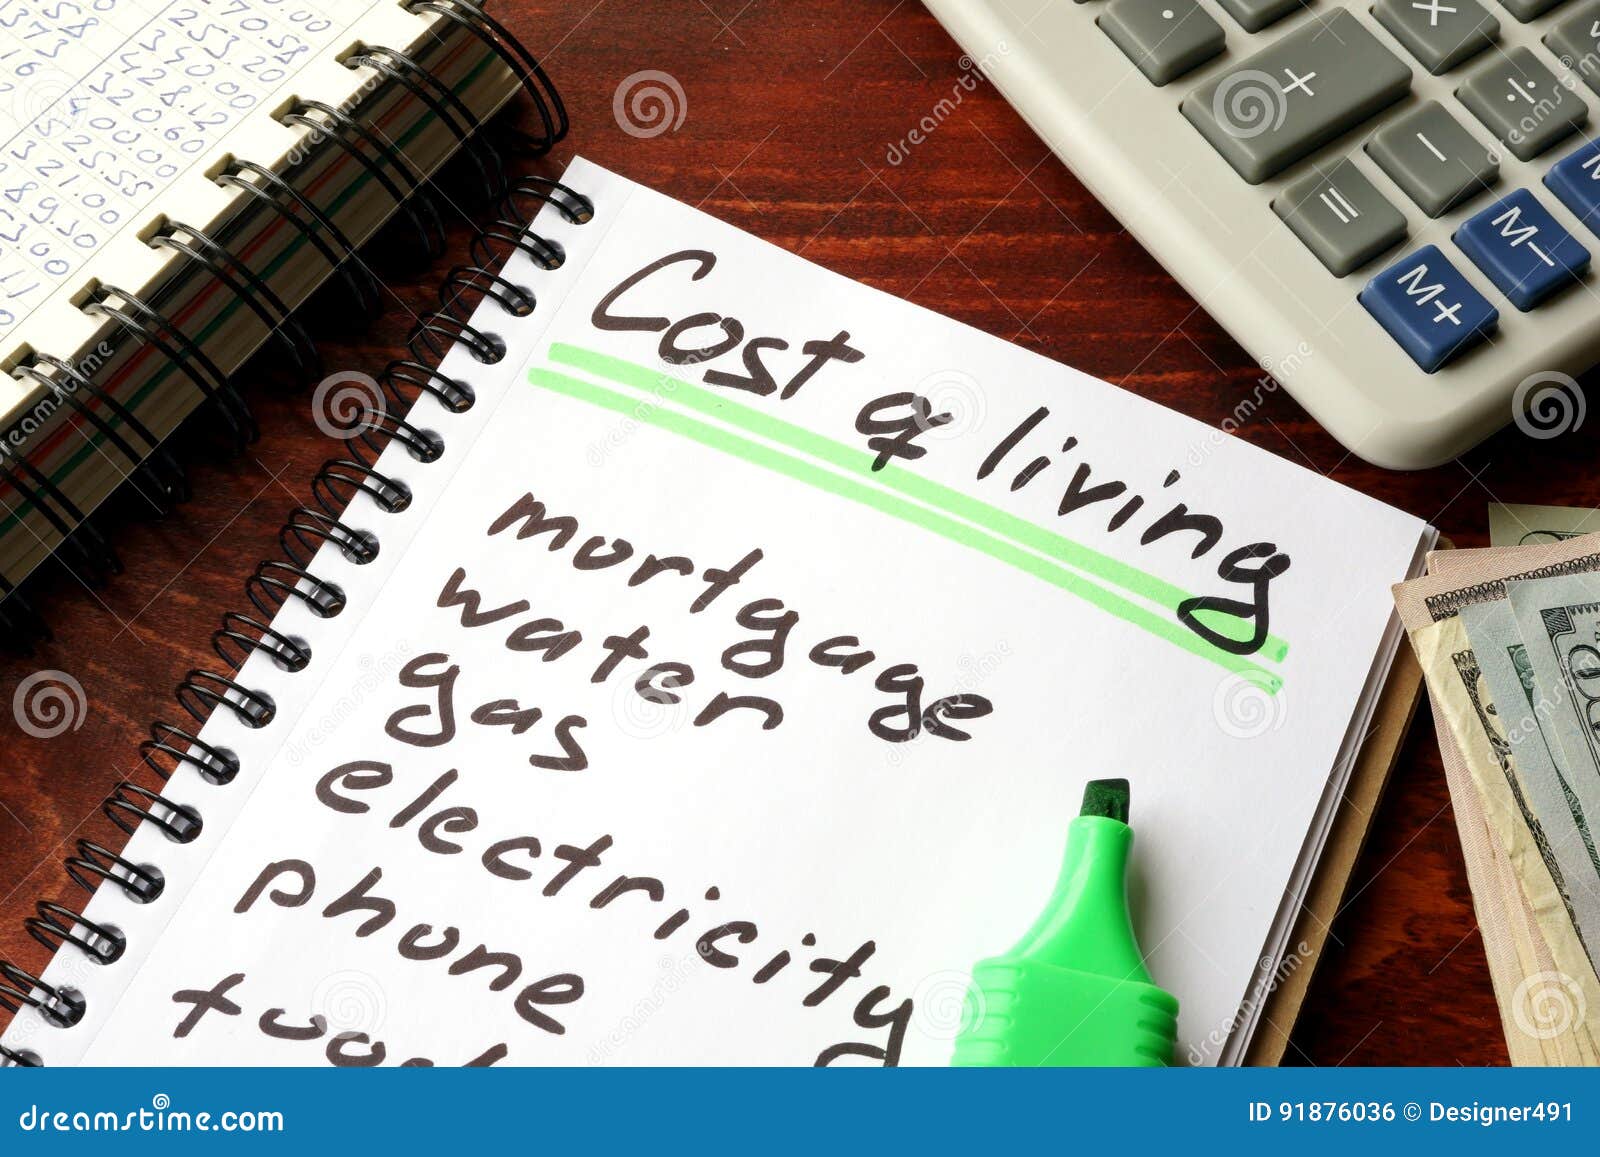 cost of living written in a notebook.